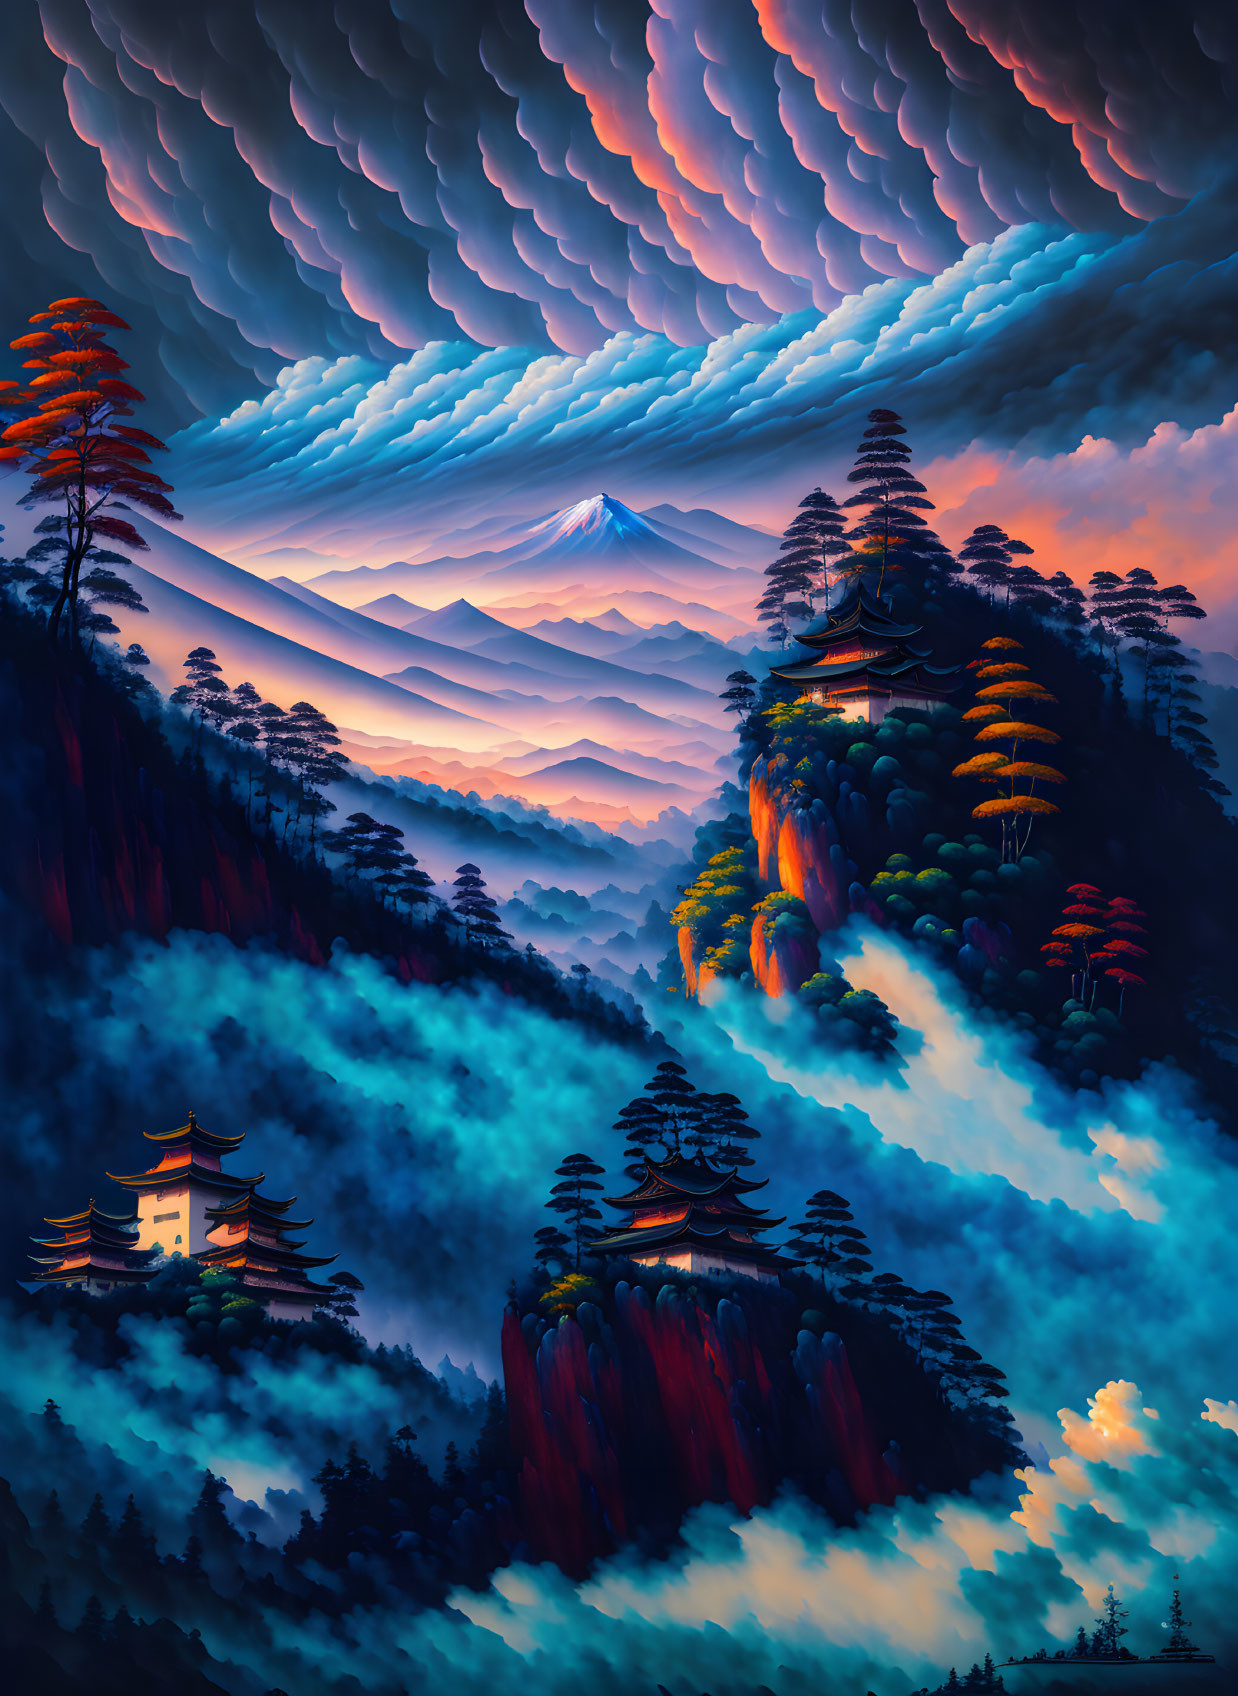 Ethereal landscape with misty mountains, autumn trees, and dynamic sky